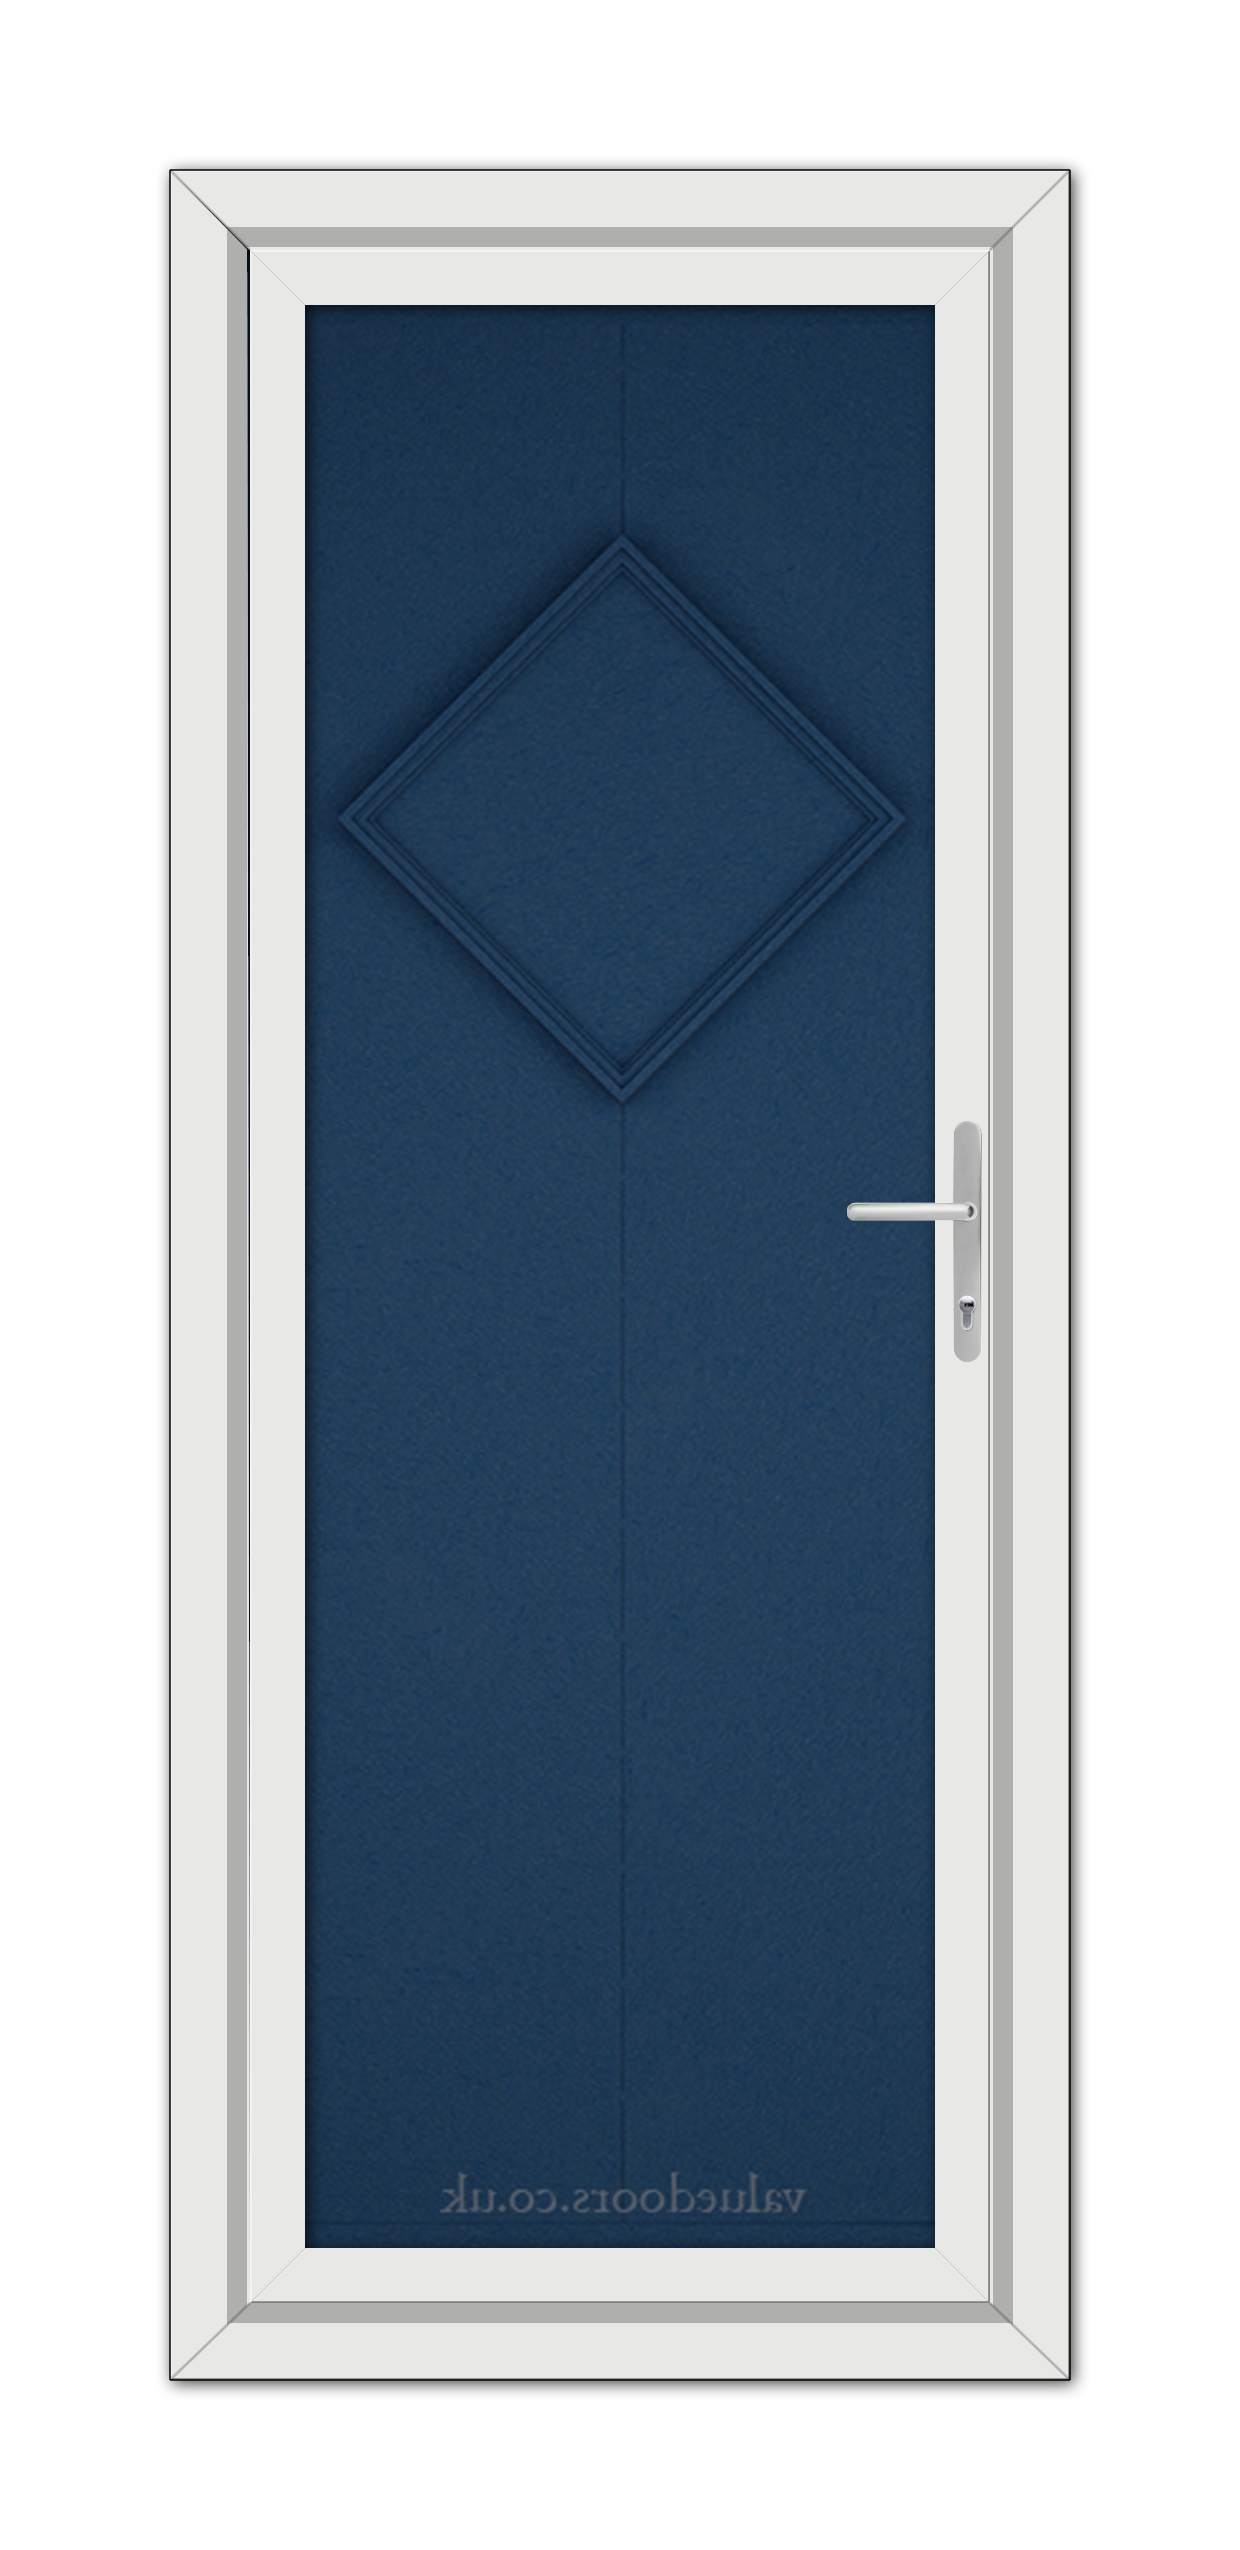 A vertical image of a modern Blue Hamburg Solid uPVC Door with a diamond pattern design, framed in white, featuring a silver handle on the right side.